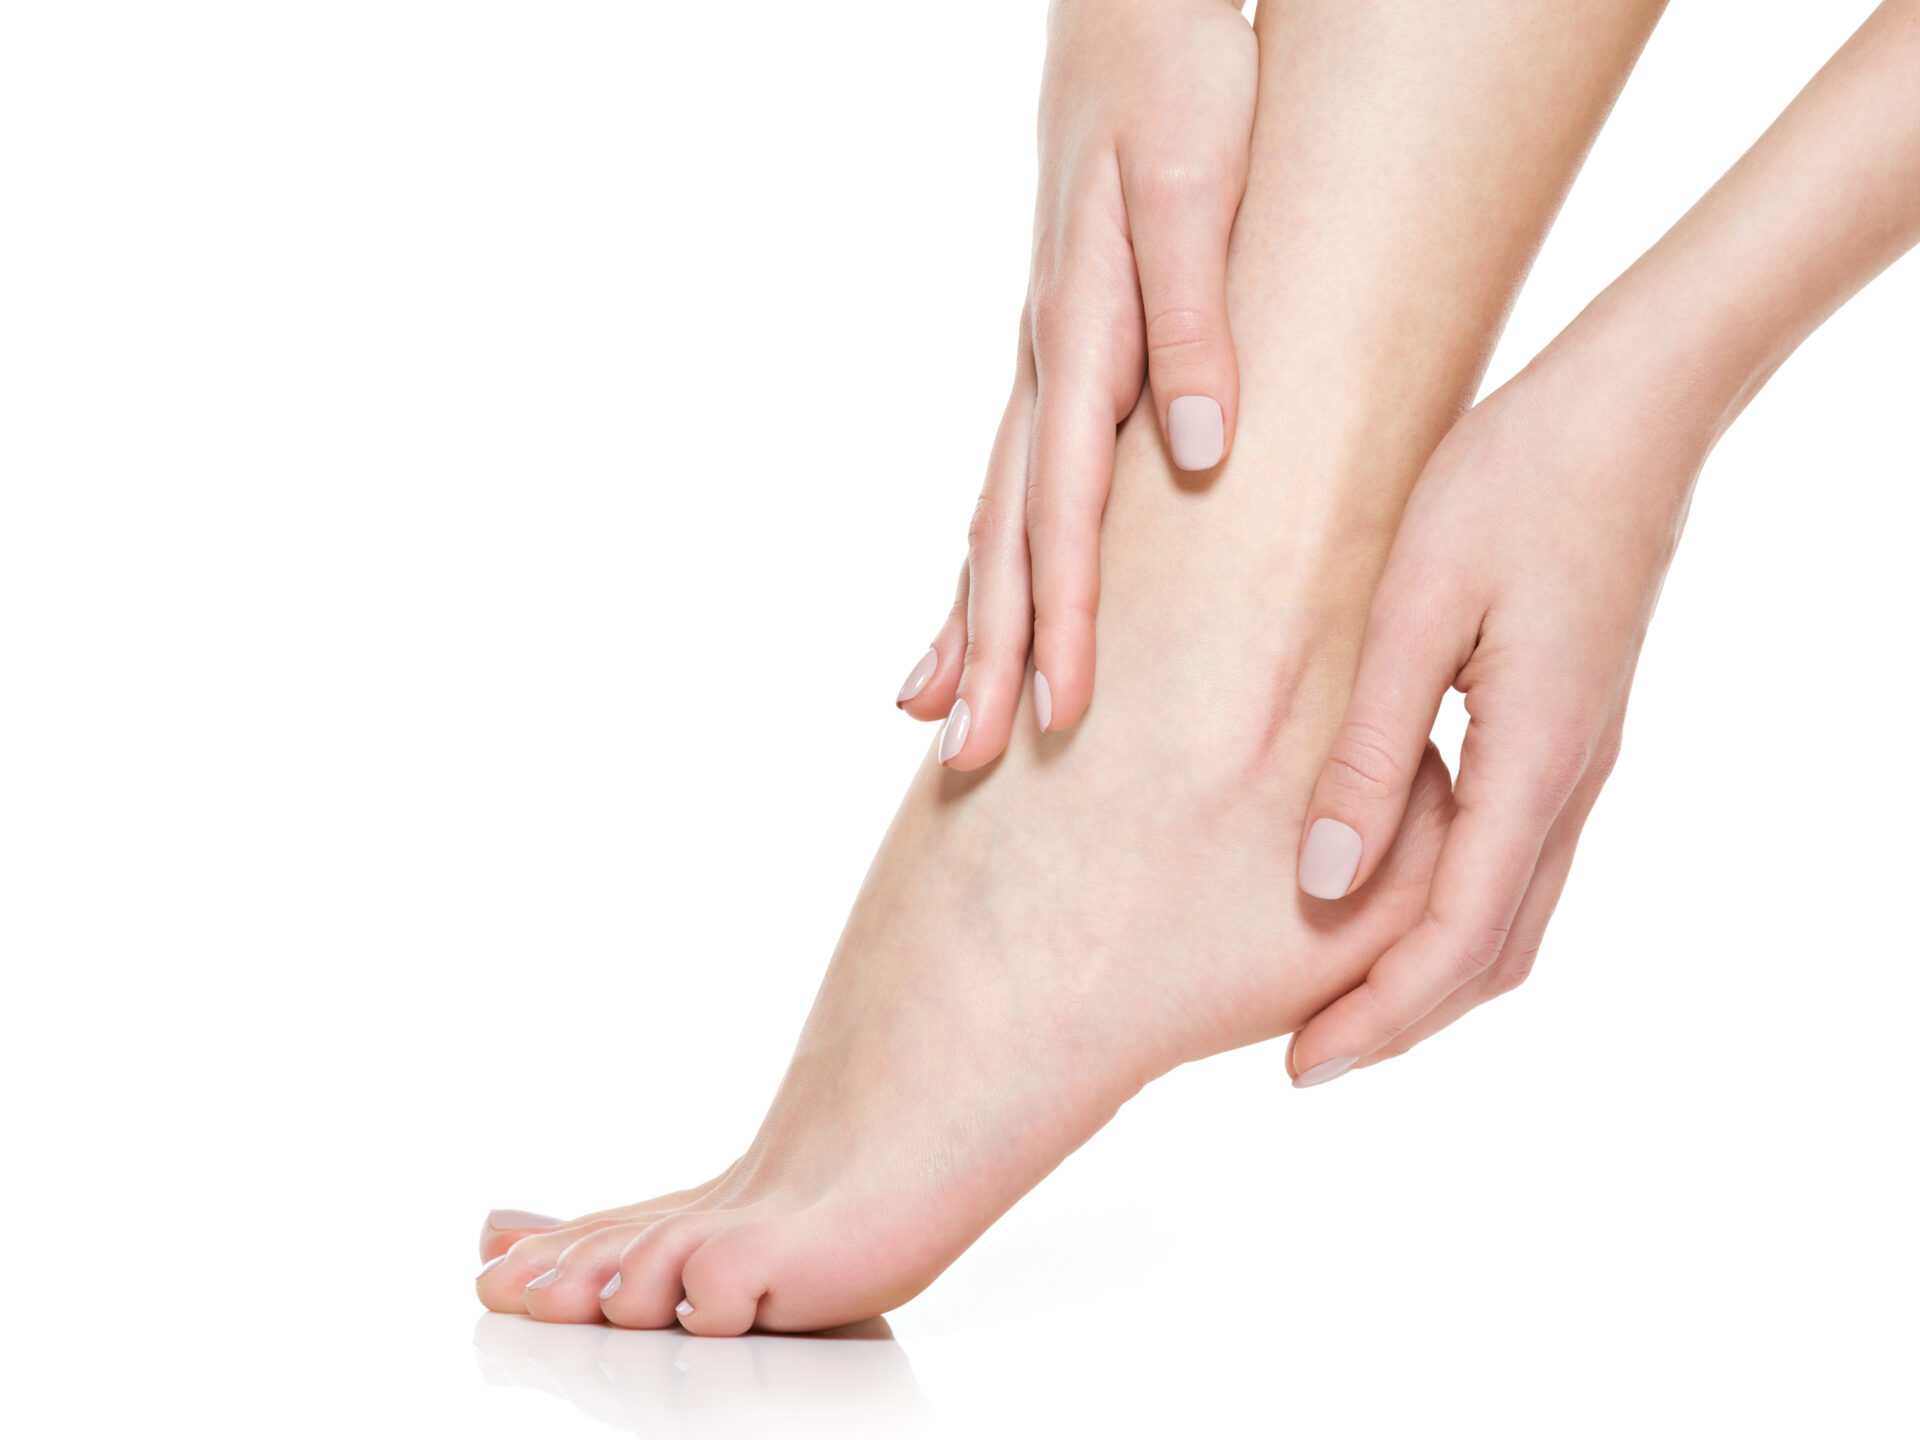 Foot Odor: Tackling the Stinky Feet Problem